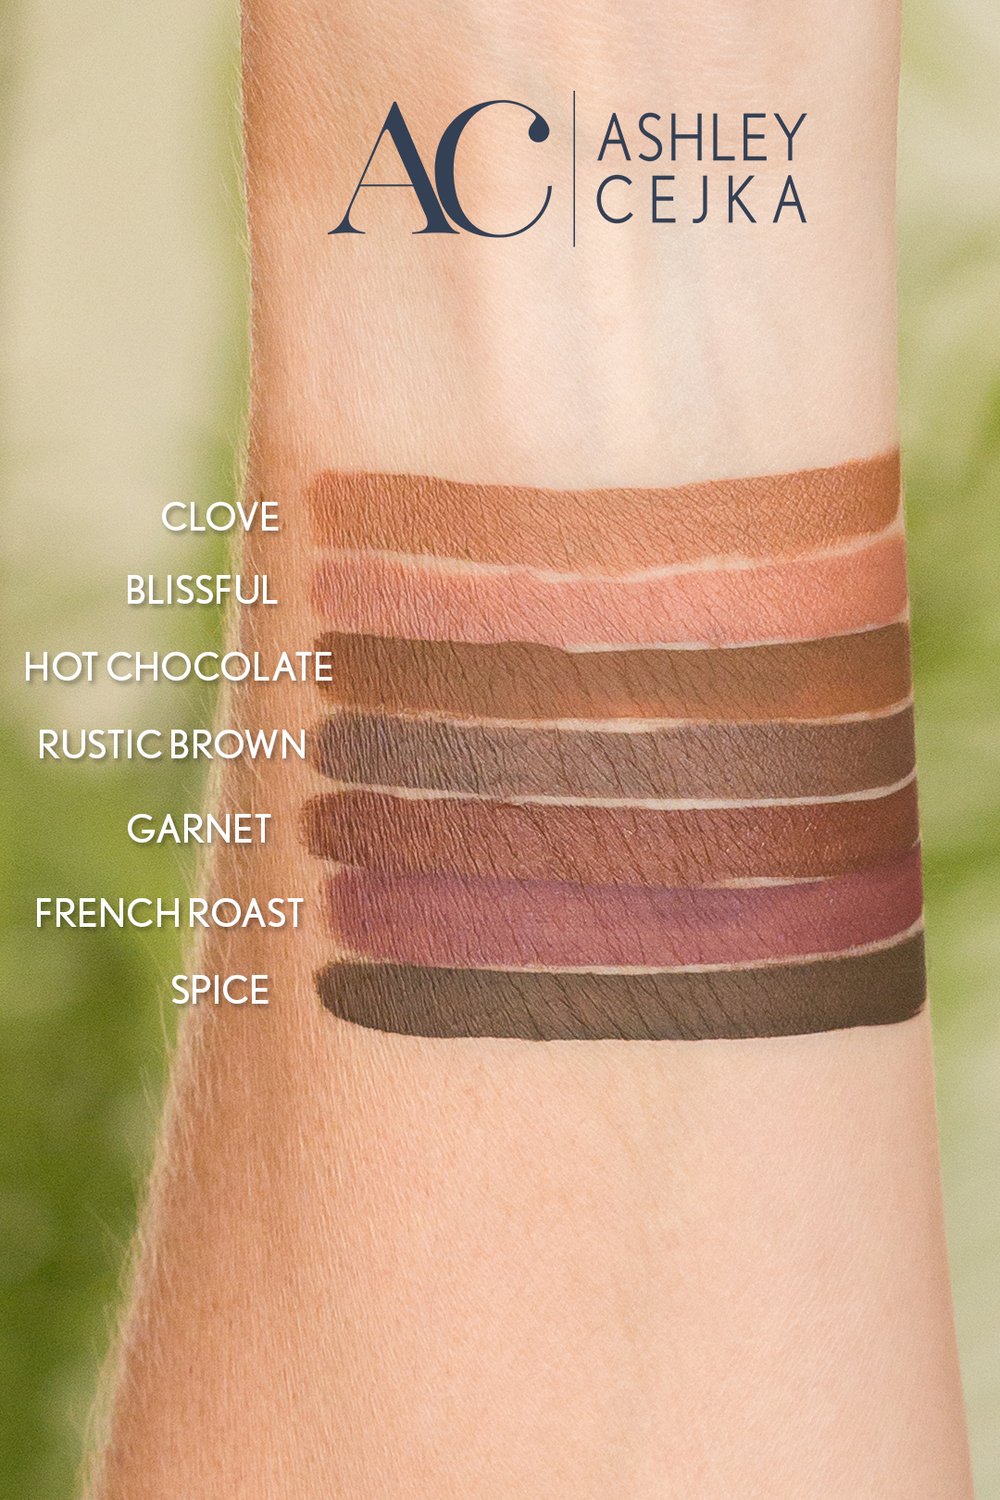  Hot Chocolate ShadowSense compared to Clove, Blissful, Rustic Brown, Garnet, French Roast, and Spice ShadowSense eye shadow colors. 